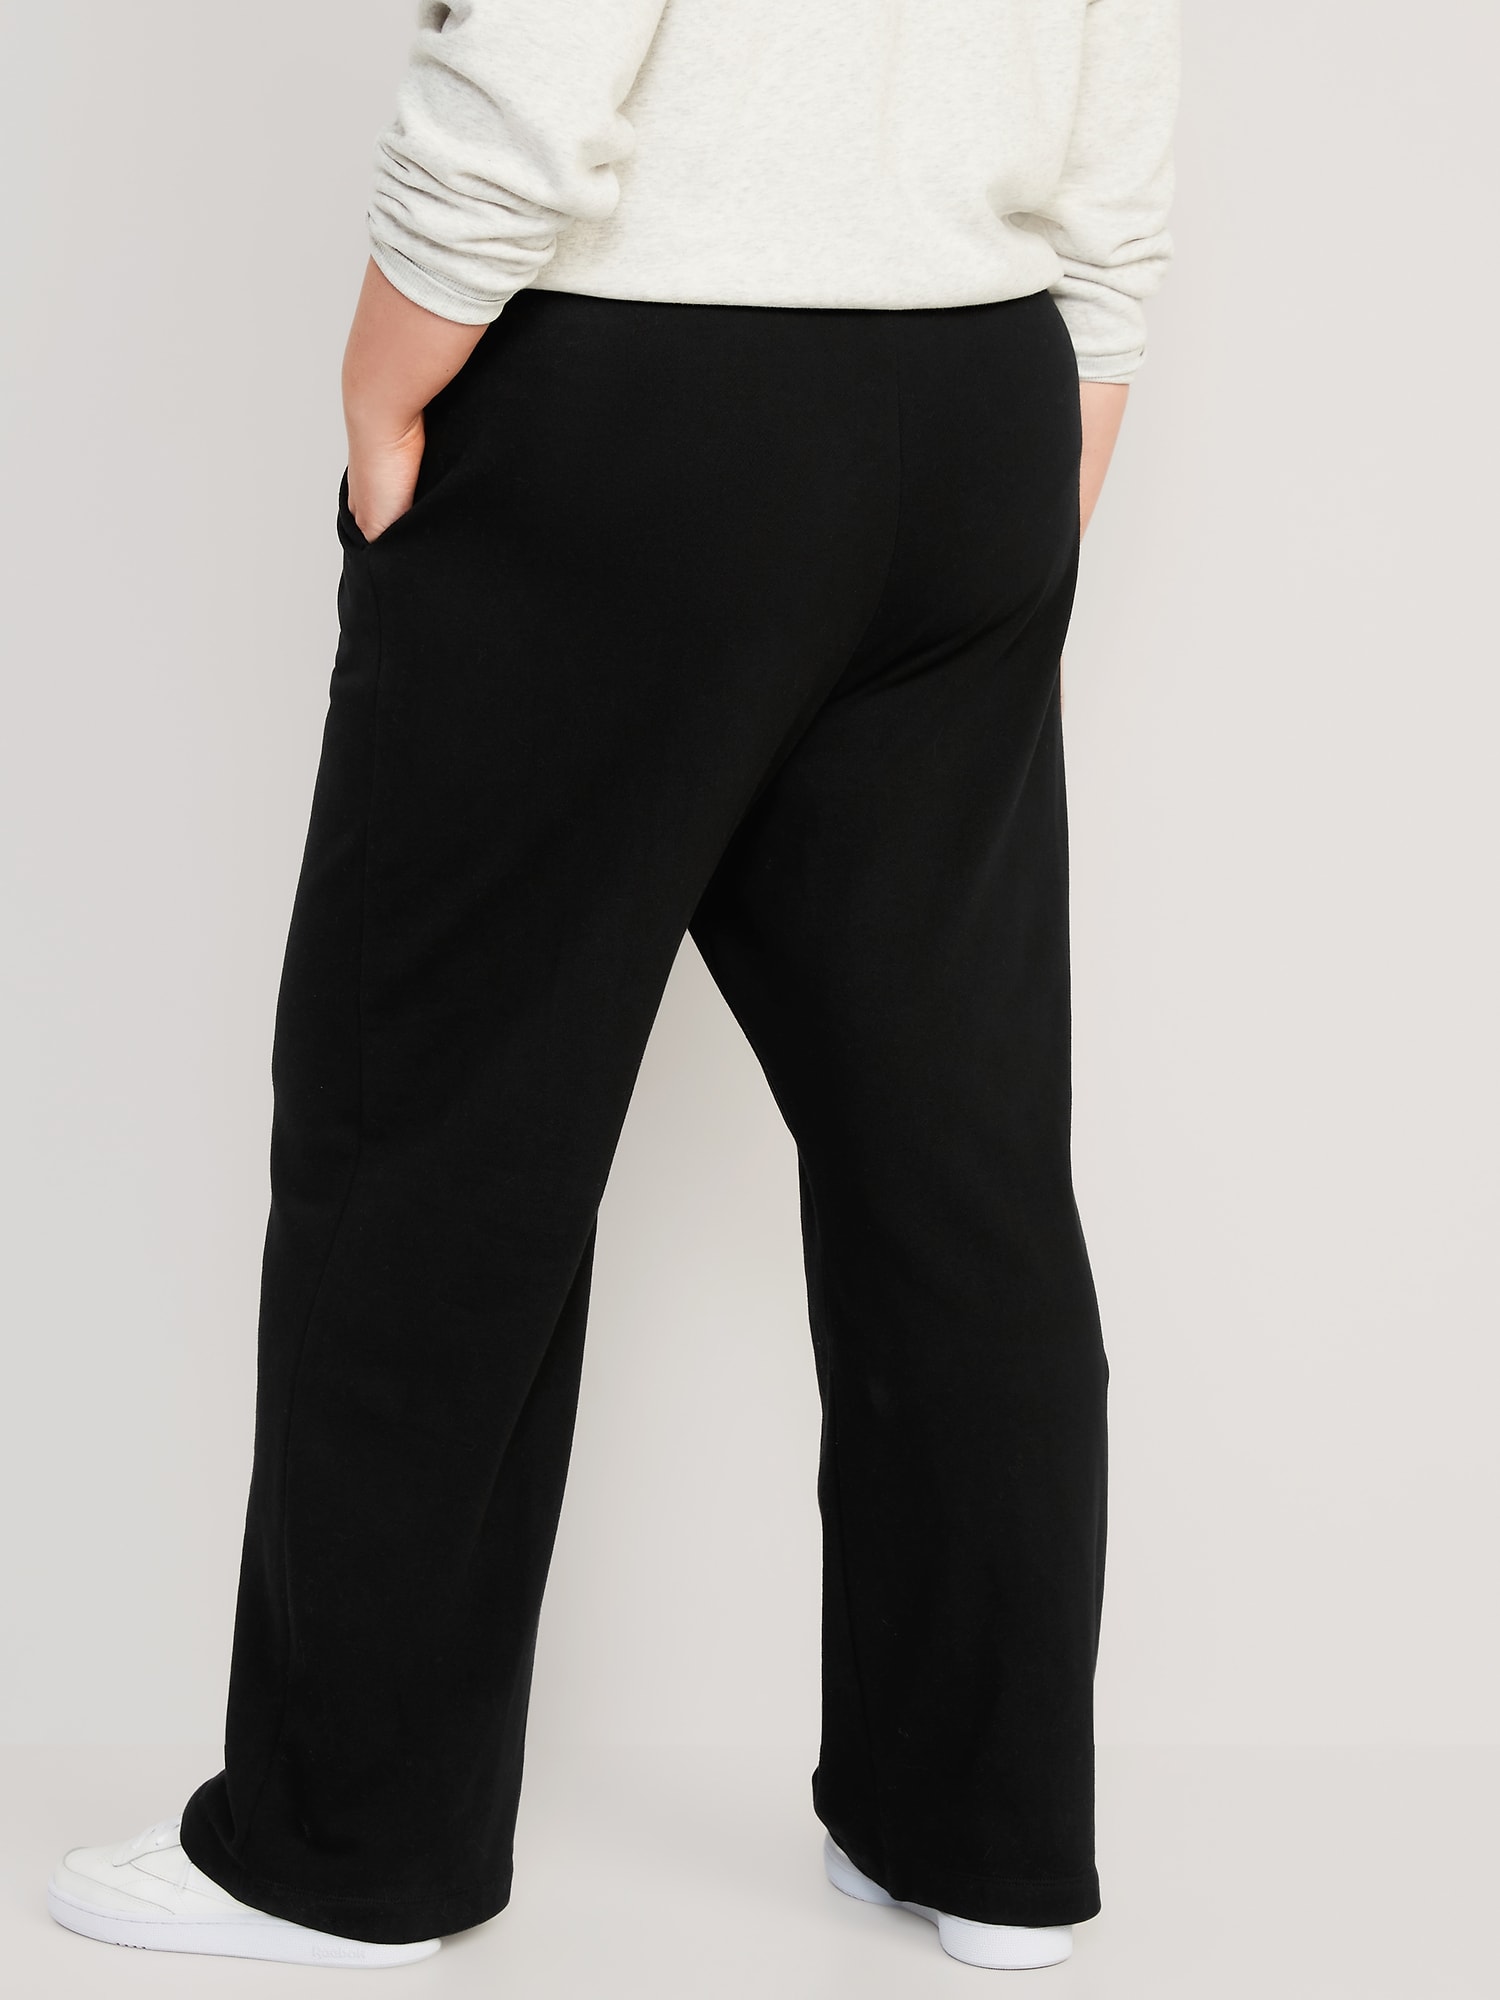 Extra High-Waisted Vintage | Sweatpants Women for Old Navy